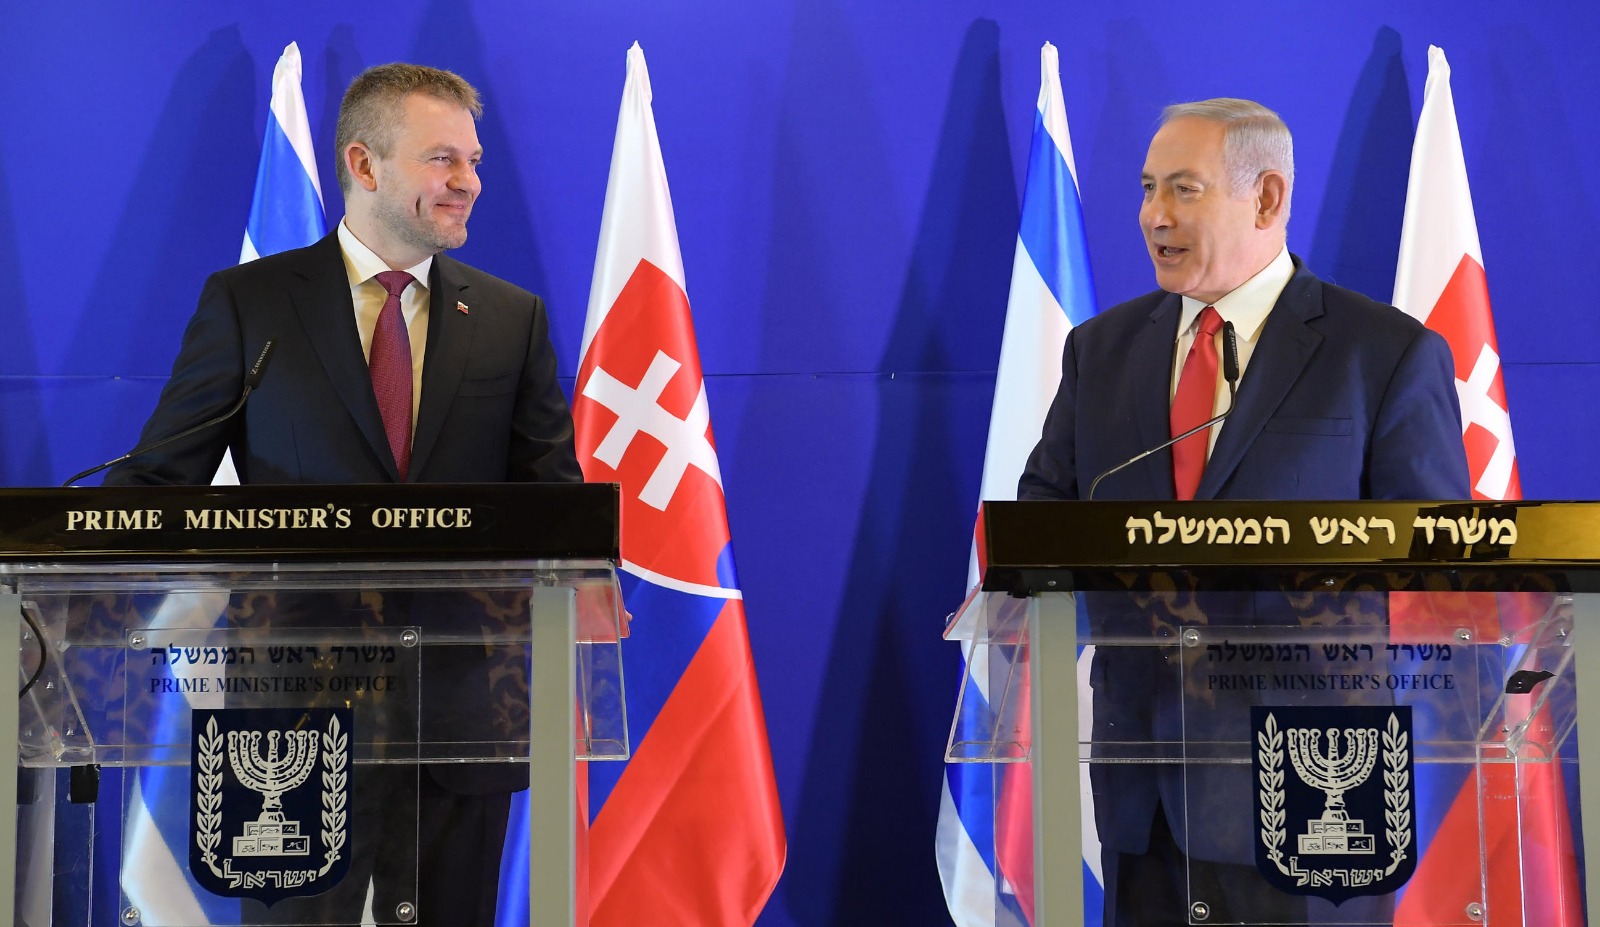 Netanyahu ‘Delighted’ by Slovakia’s Decision to Open Cultural Center in Jerusalem